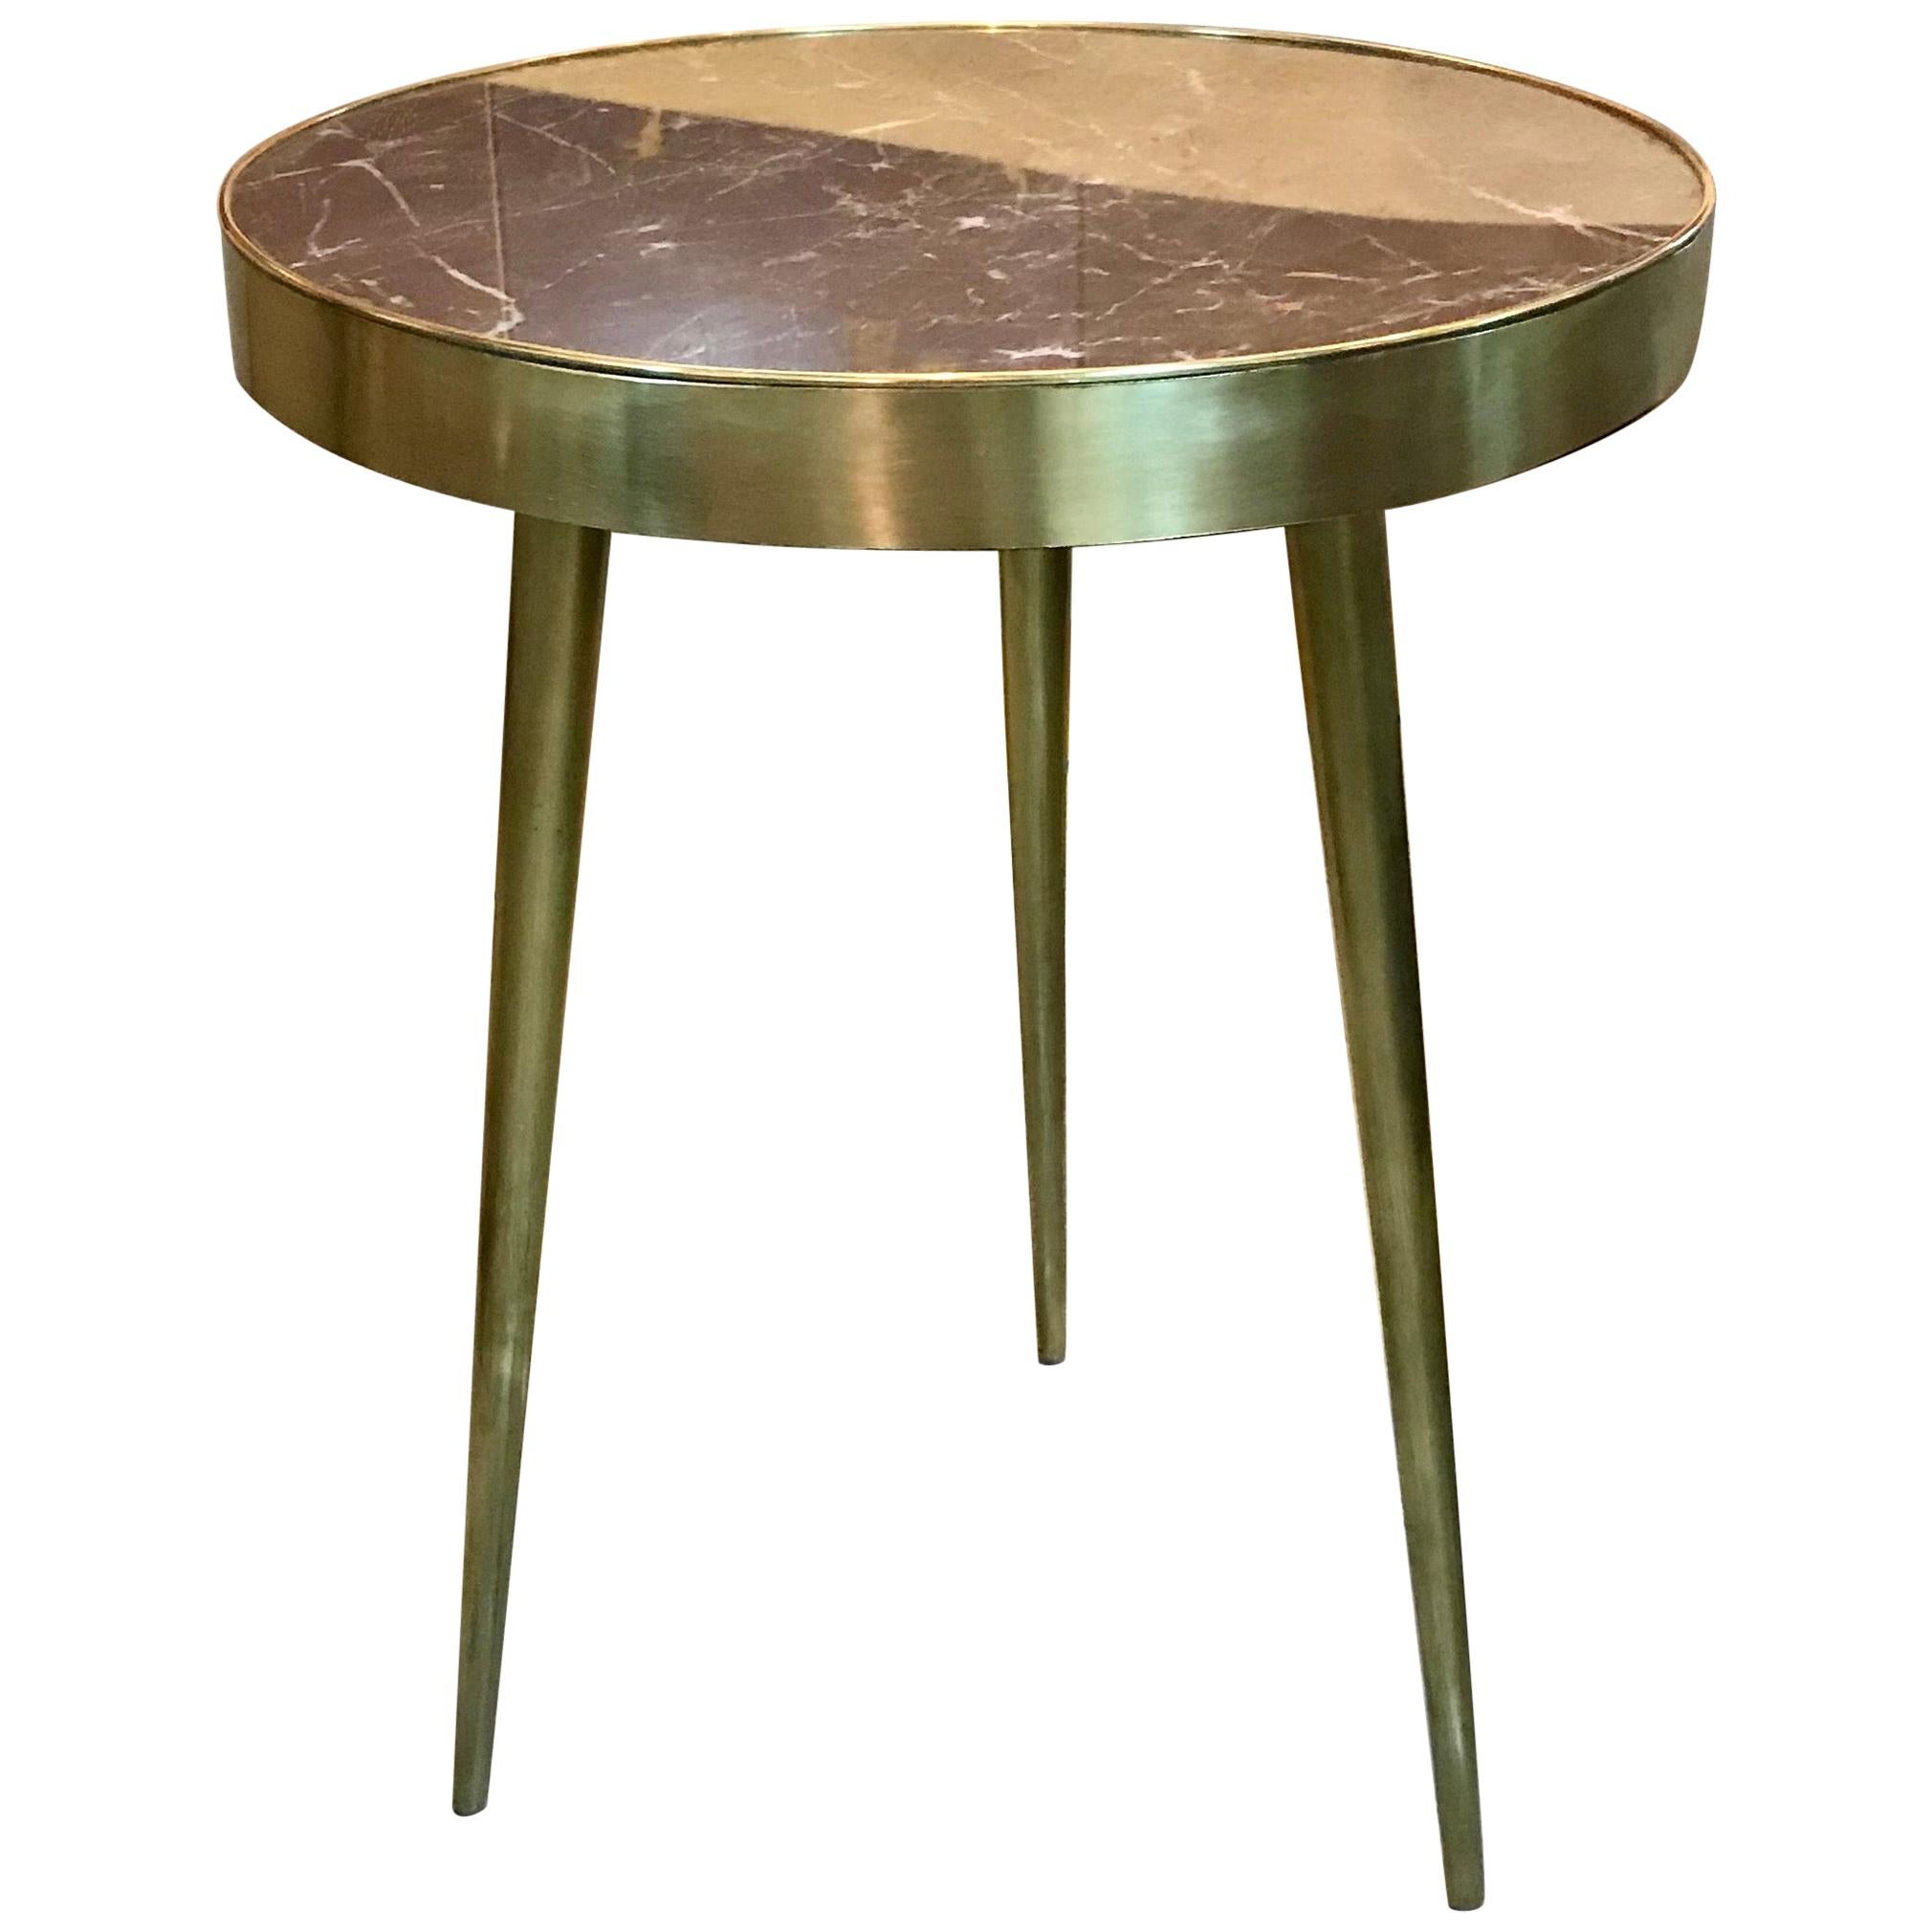 Italian Midcentury Marble and Brass Side Tables